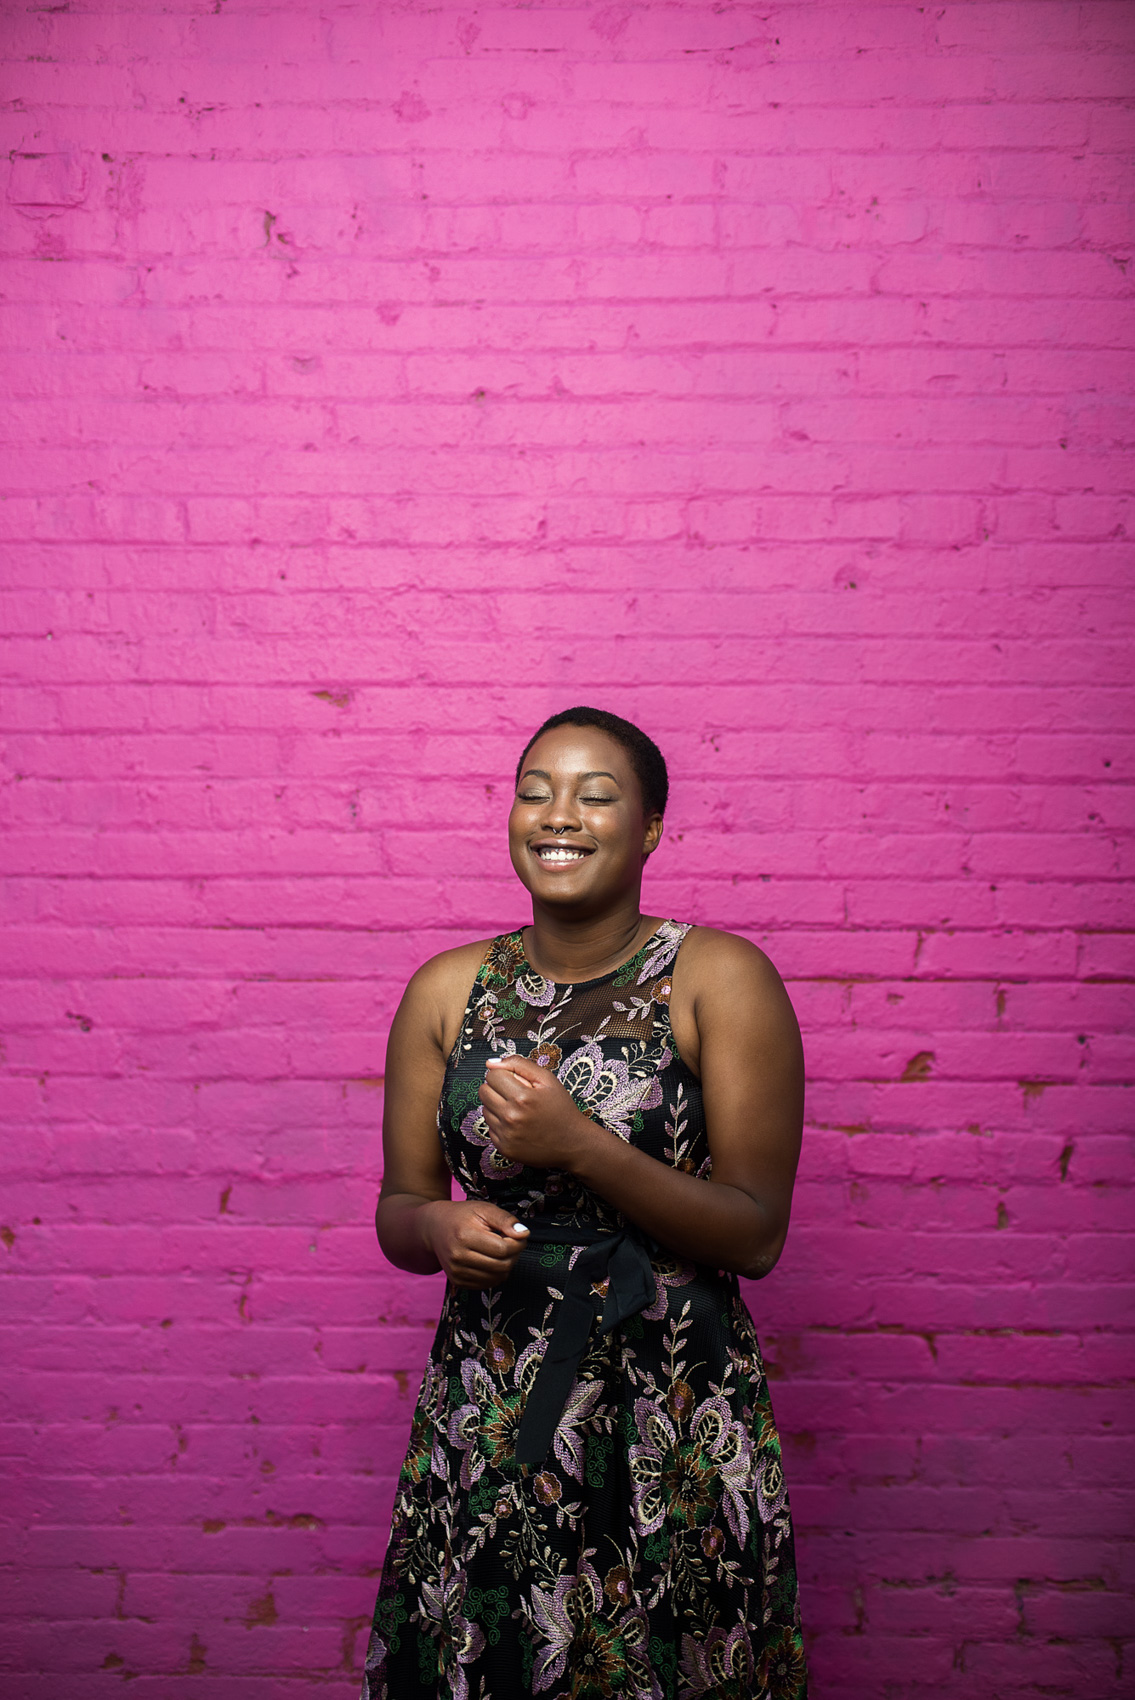 A musician portrait against a pink wall in Venice, Calif.